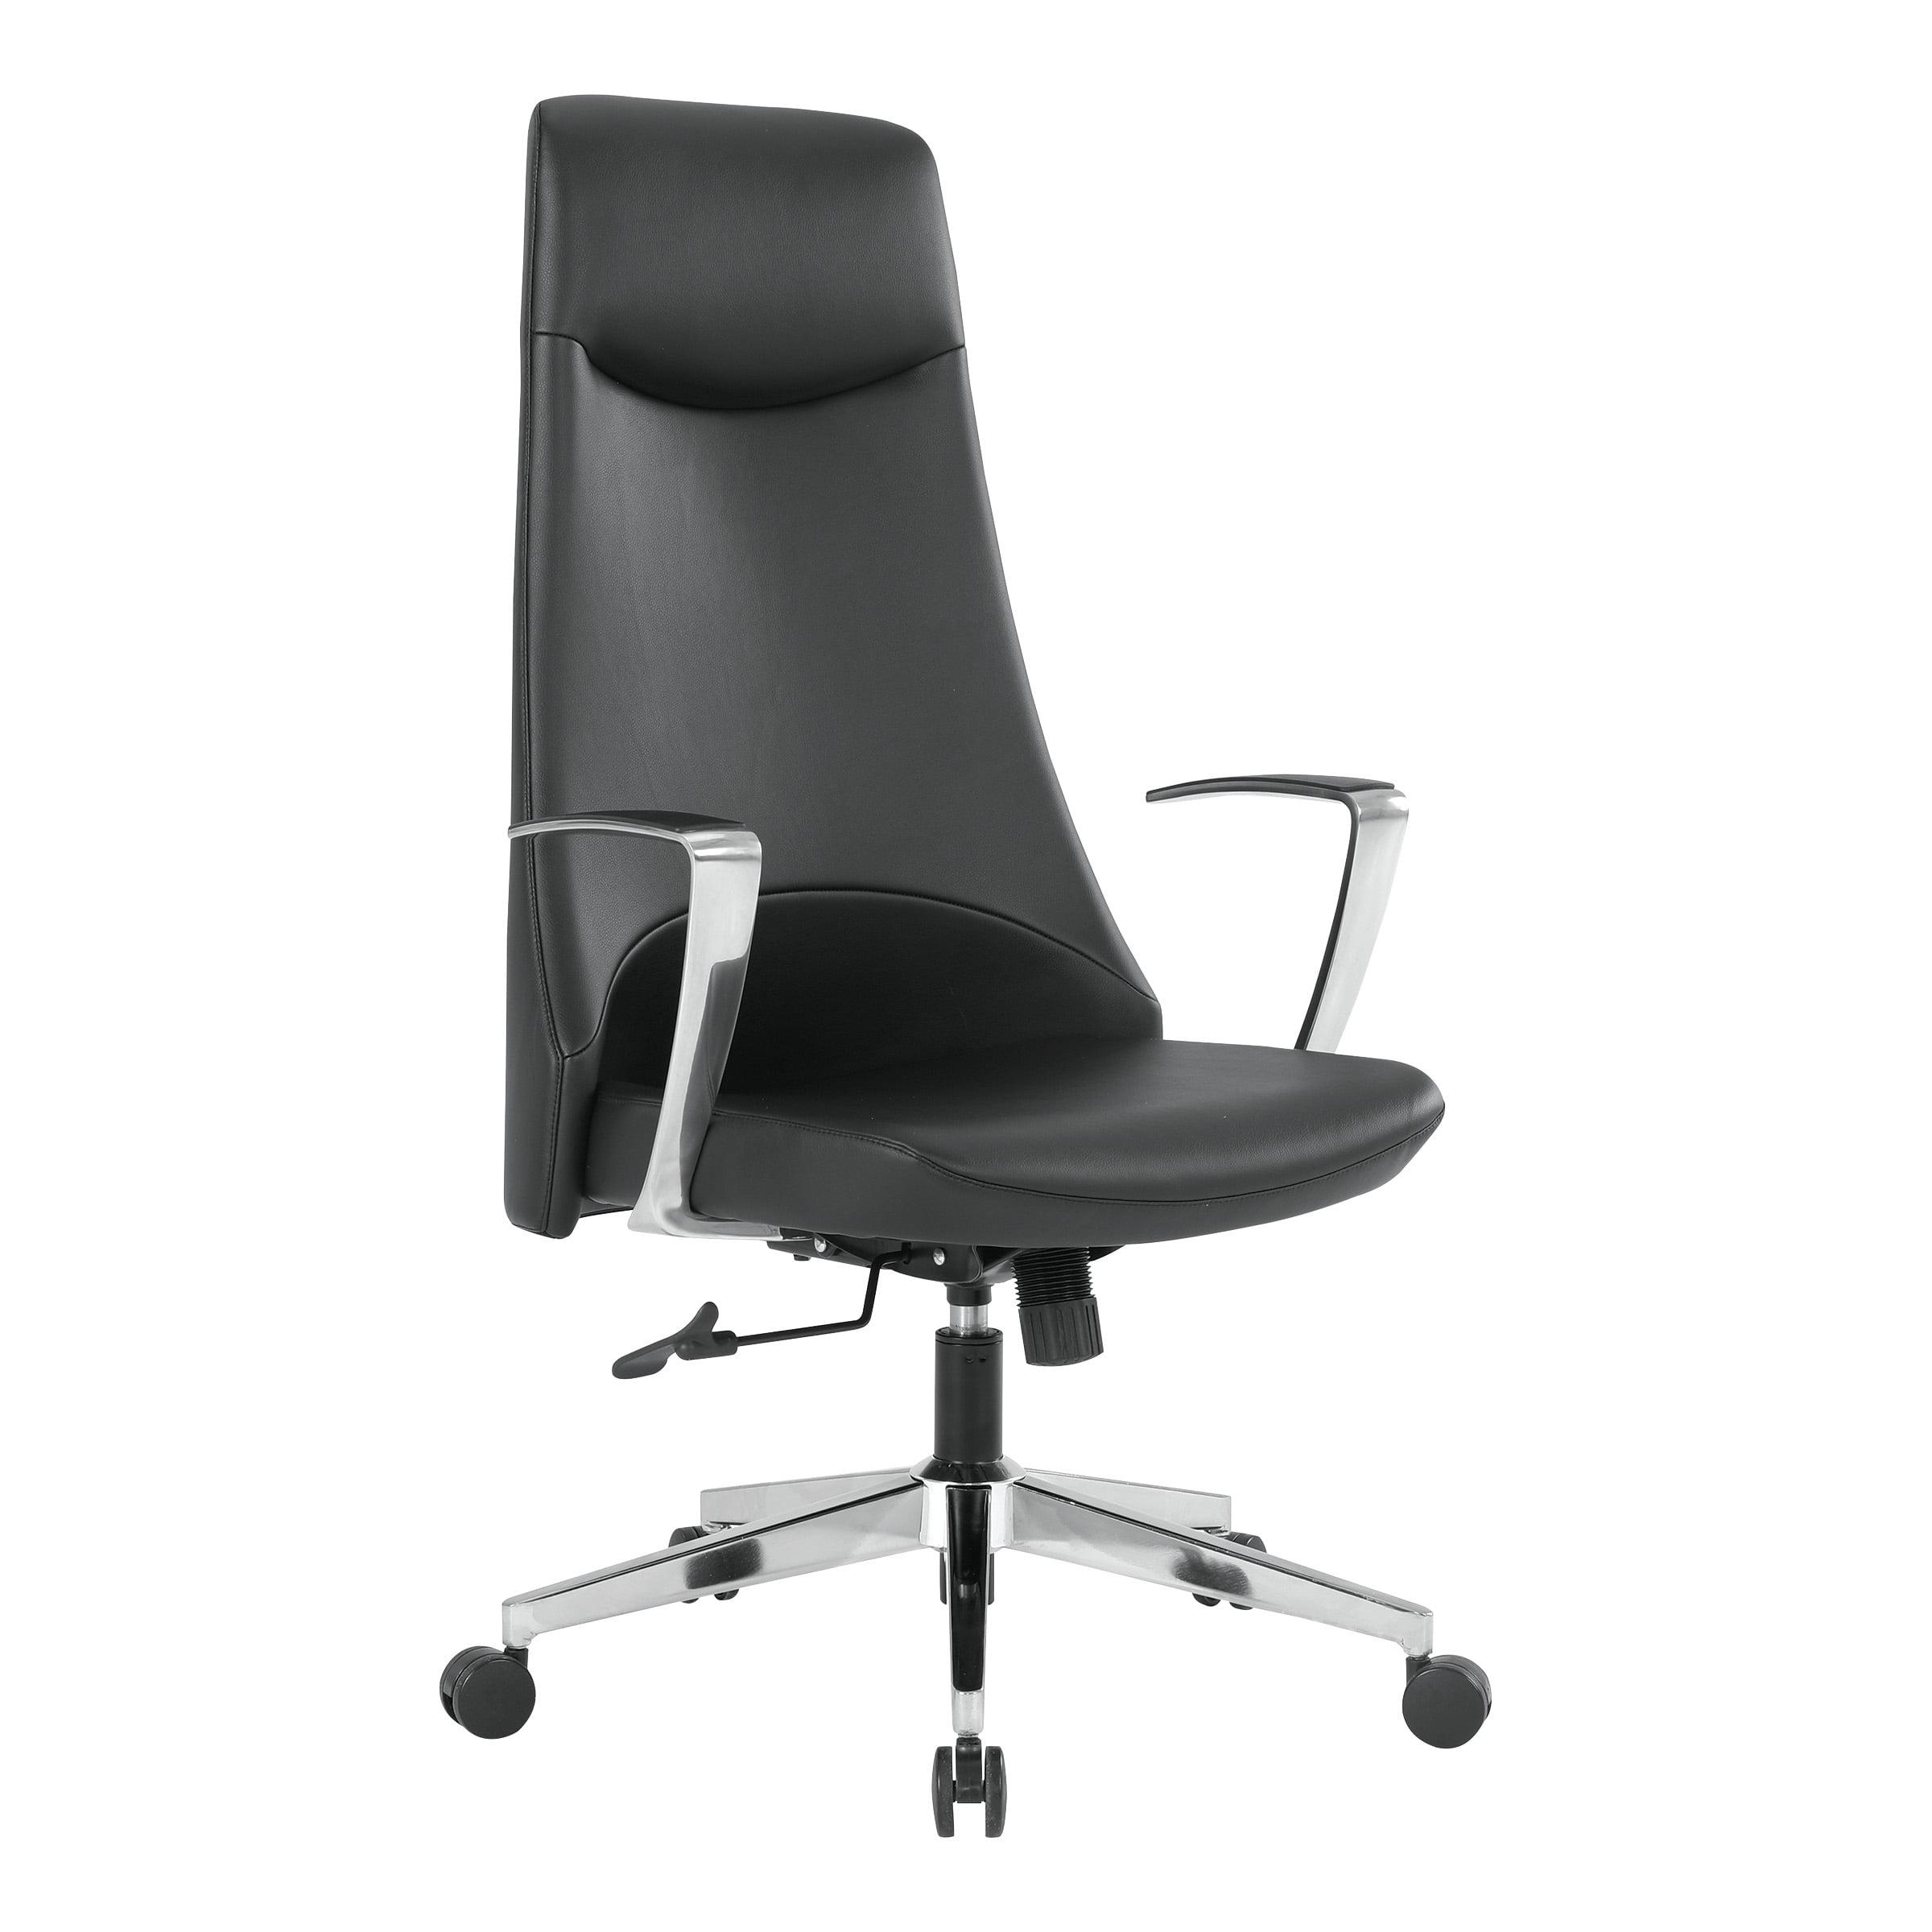 Dillon Black High-Back Swivel Office Chair with Antimicrobial Fabric